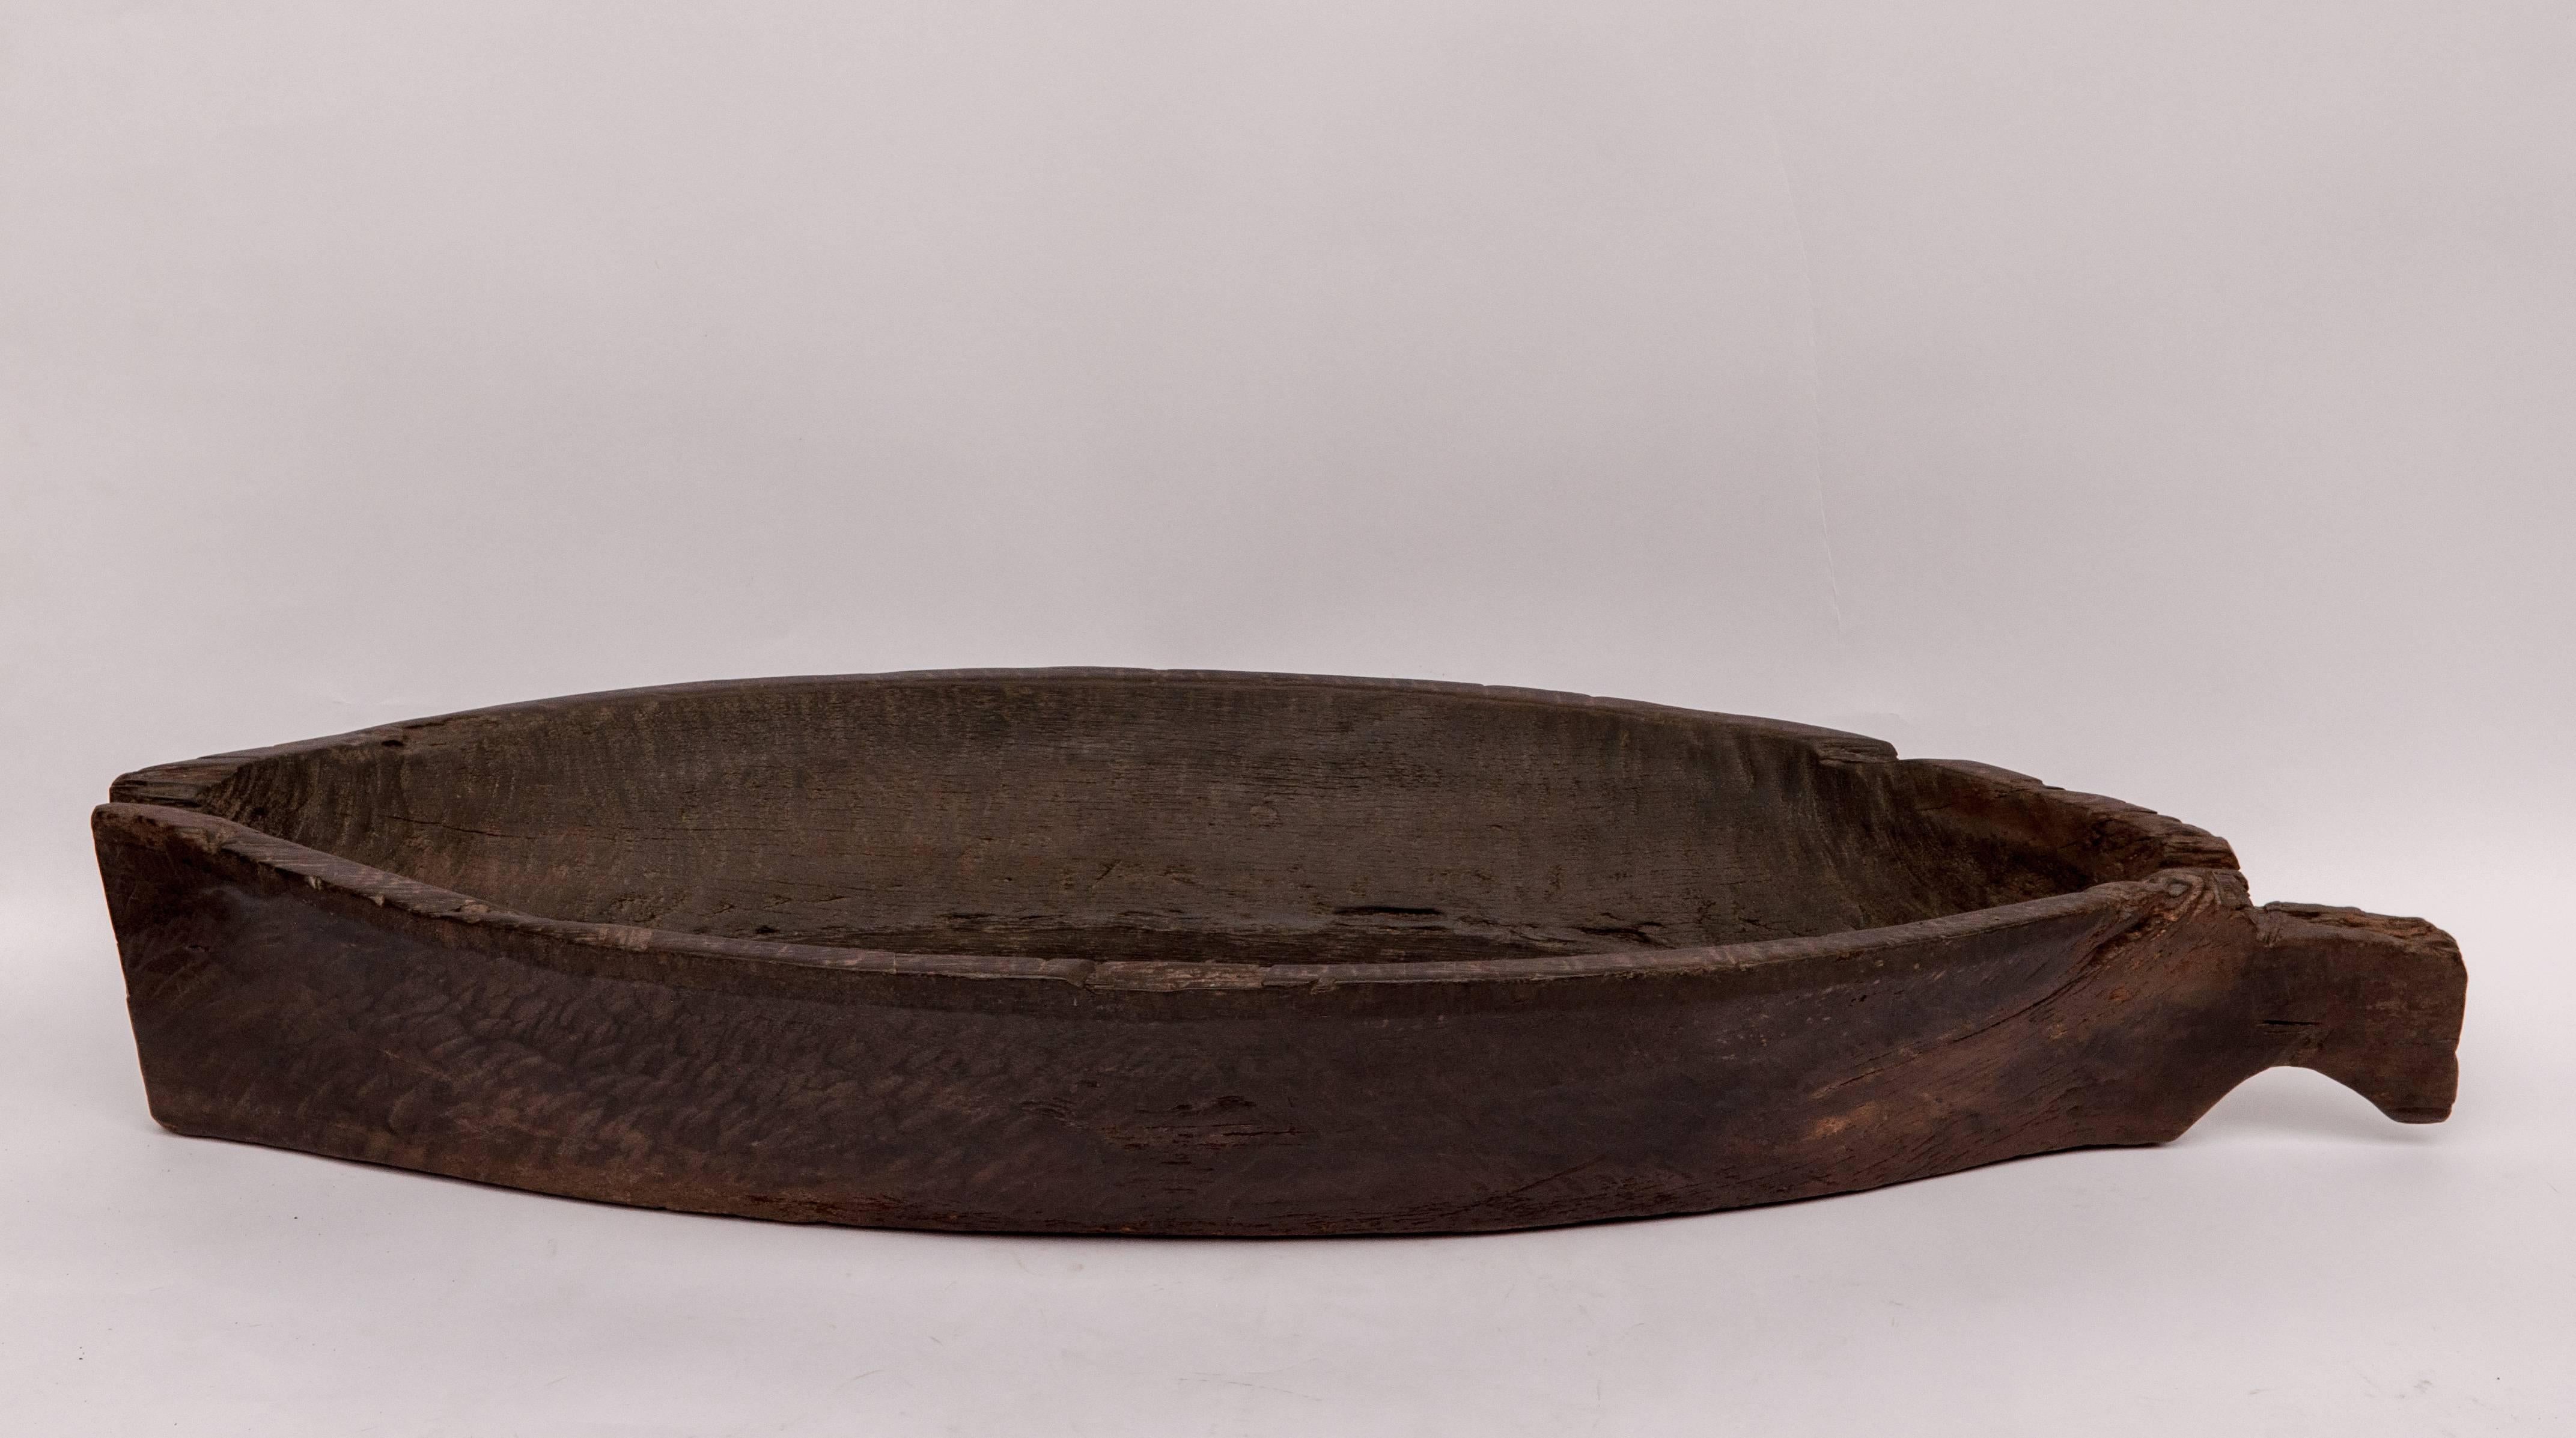 Large ironwood trough / tray from Borneo, mid-20th century.
Offered by Bruce Hughes.
This bowl is hand hewn from a single piece of very dense ironwood. There is some erosion near the handle as well as at the other end of the piece, but it is